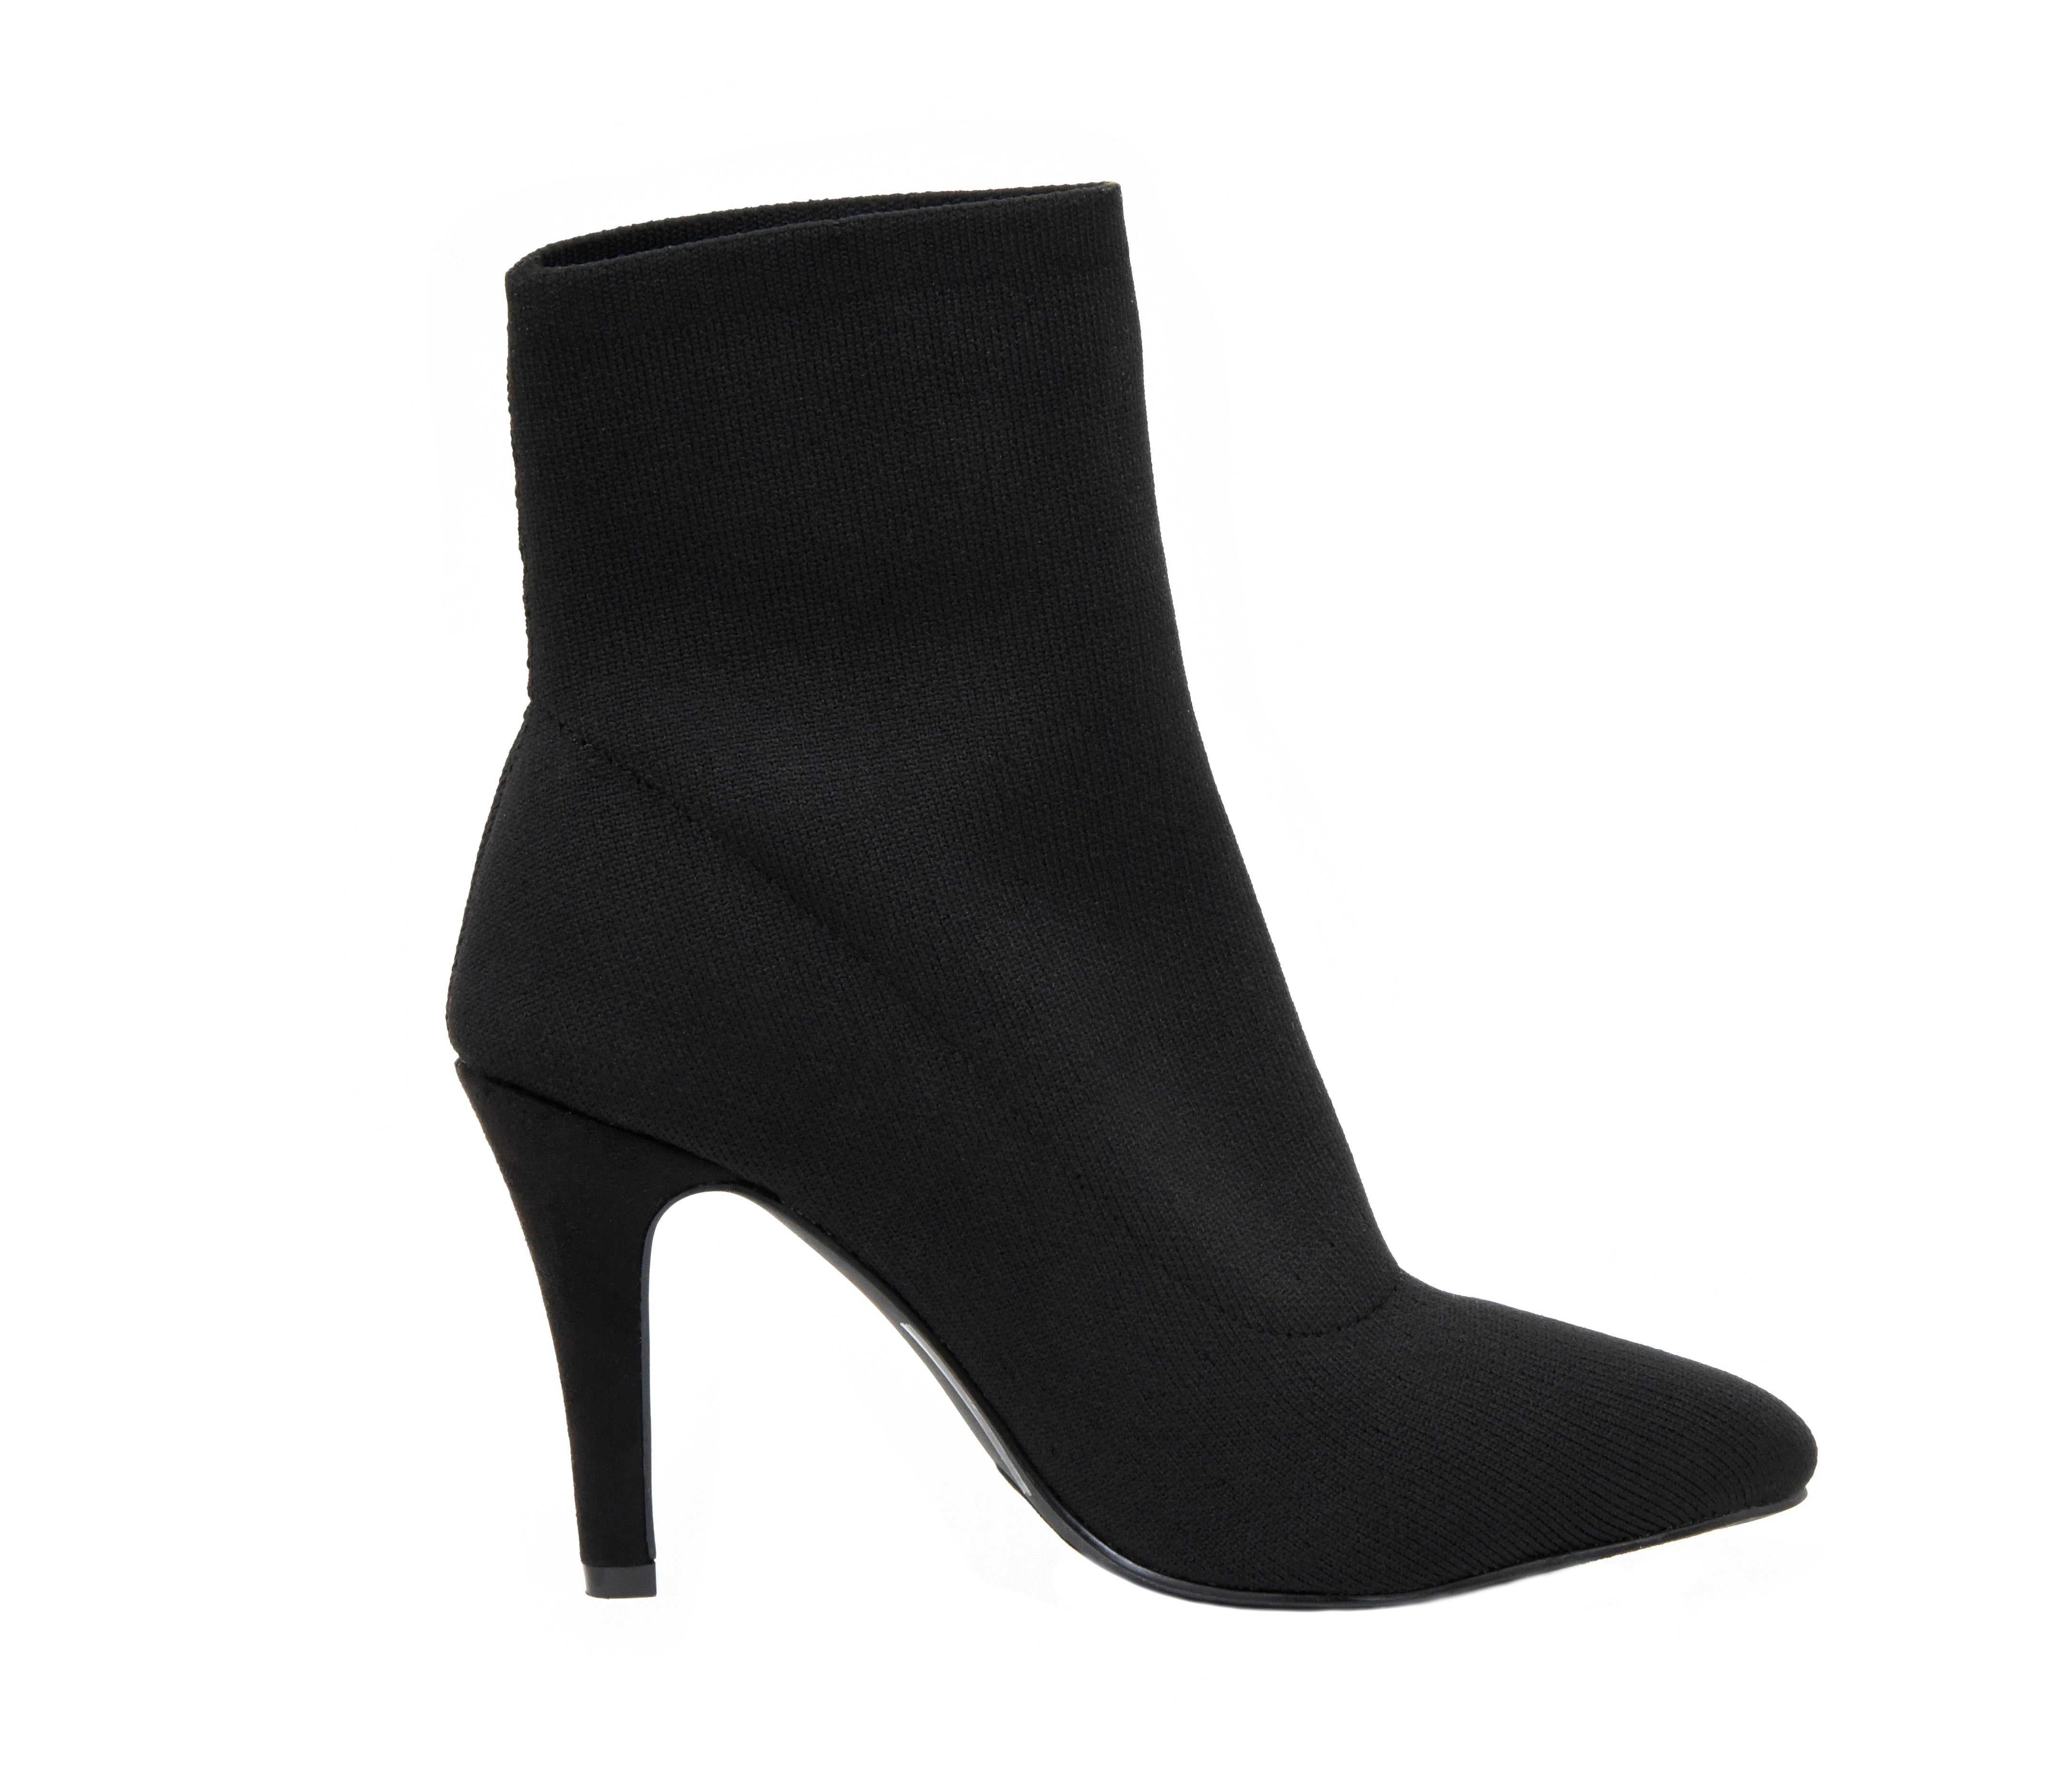 Gipsee Knit Dress Bootie